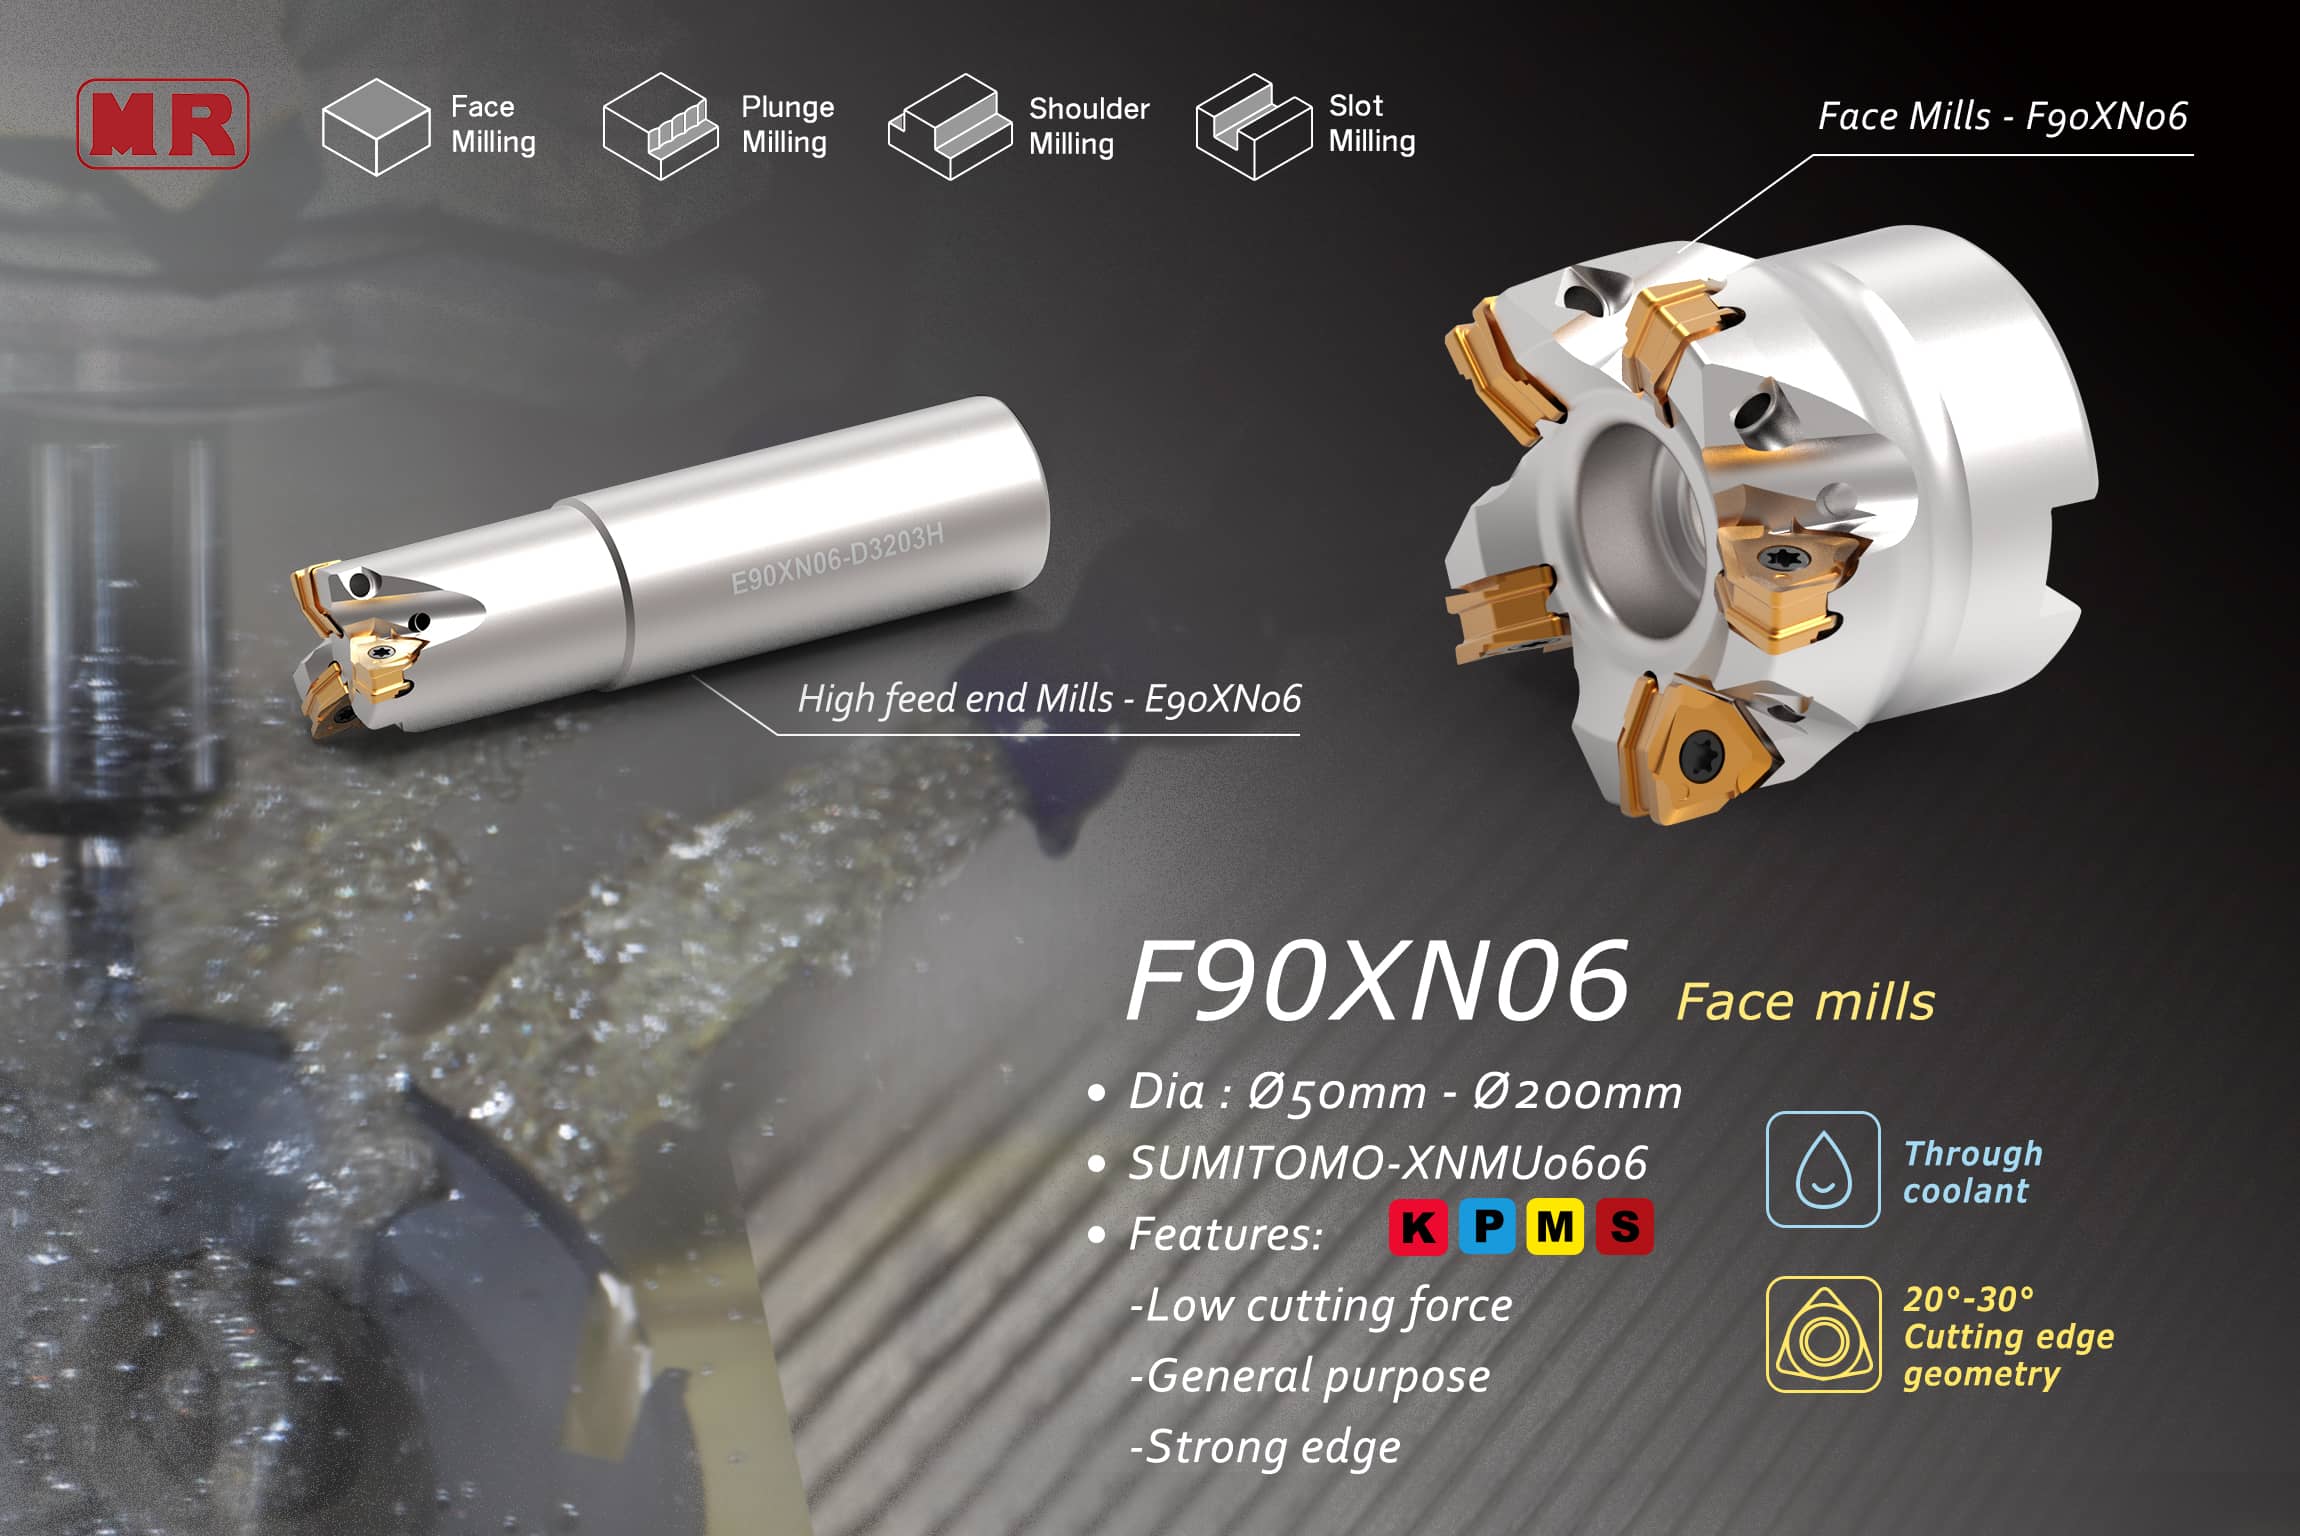 Products|End Mill - E90XN06 / Face Mill - F90XN06